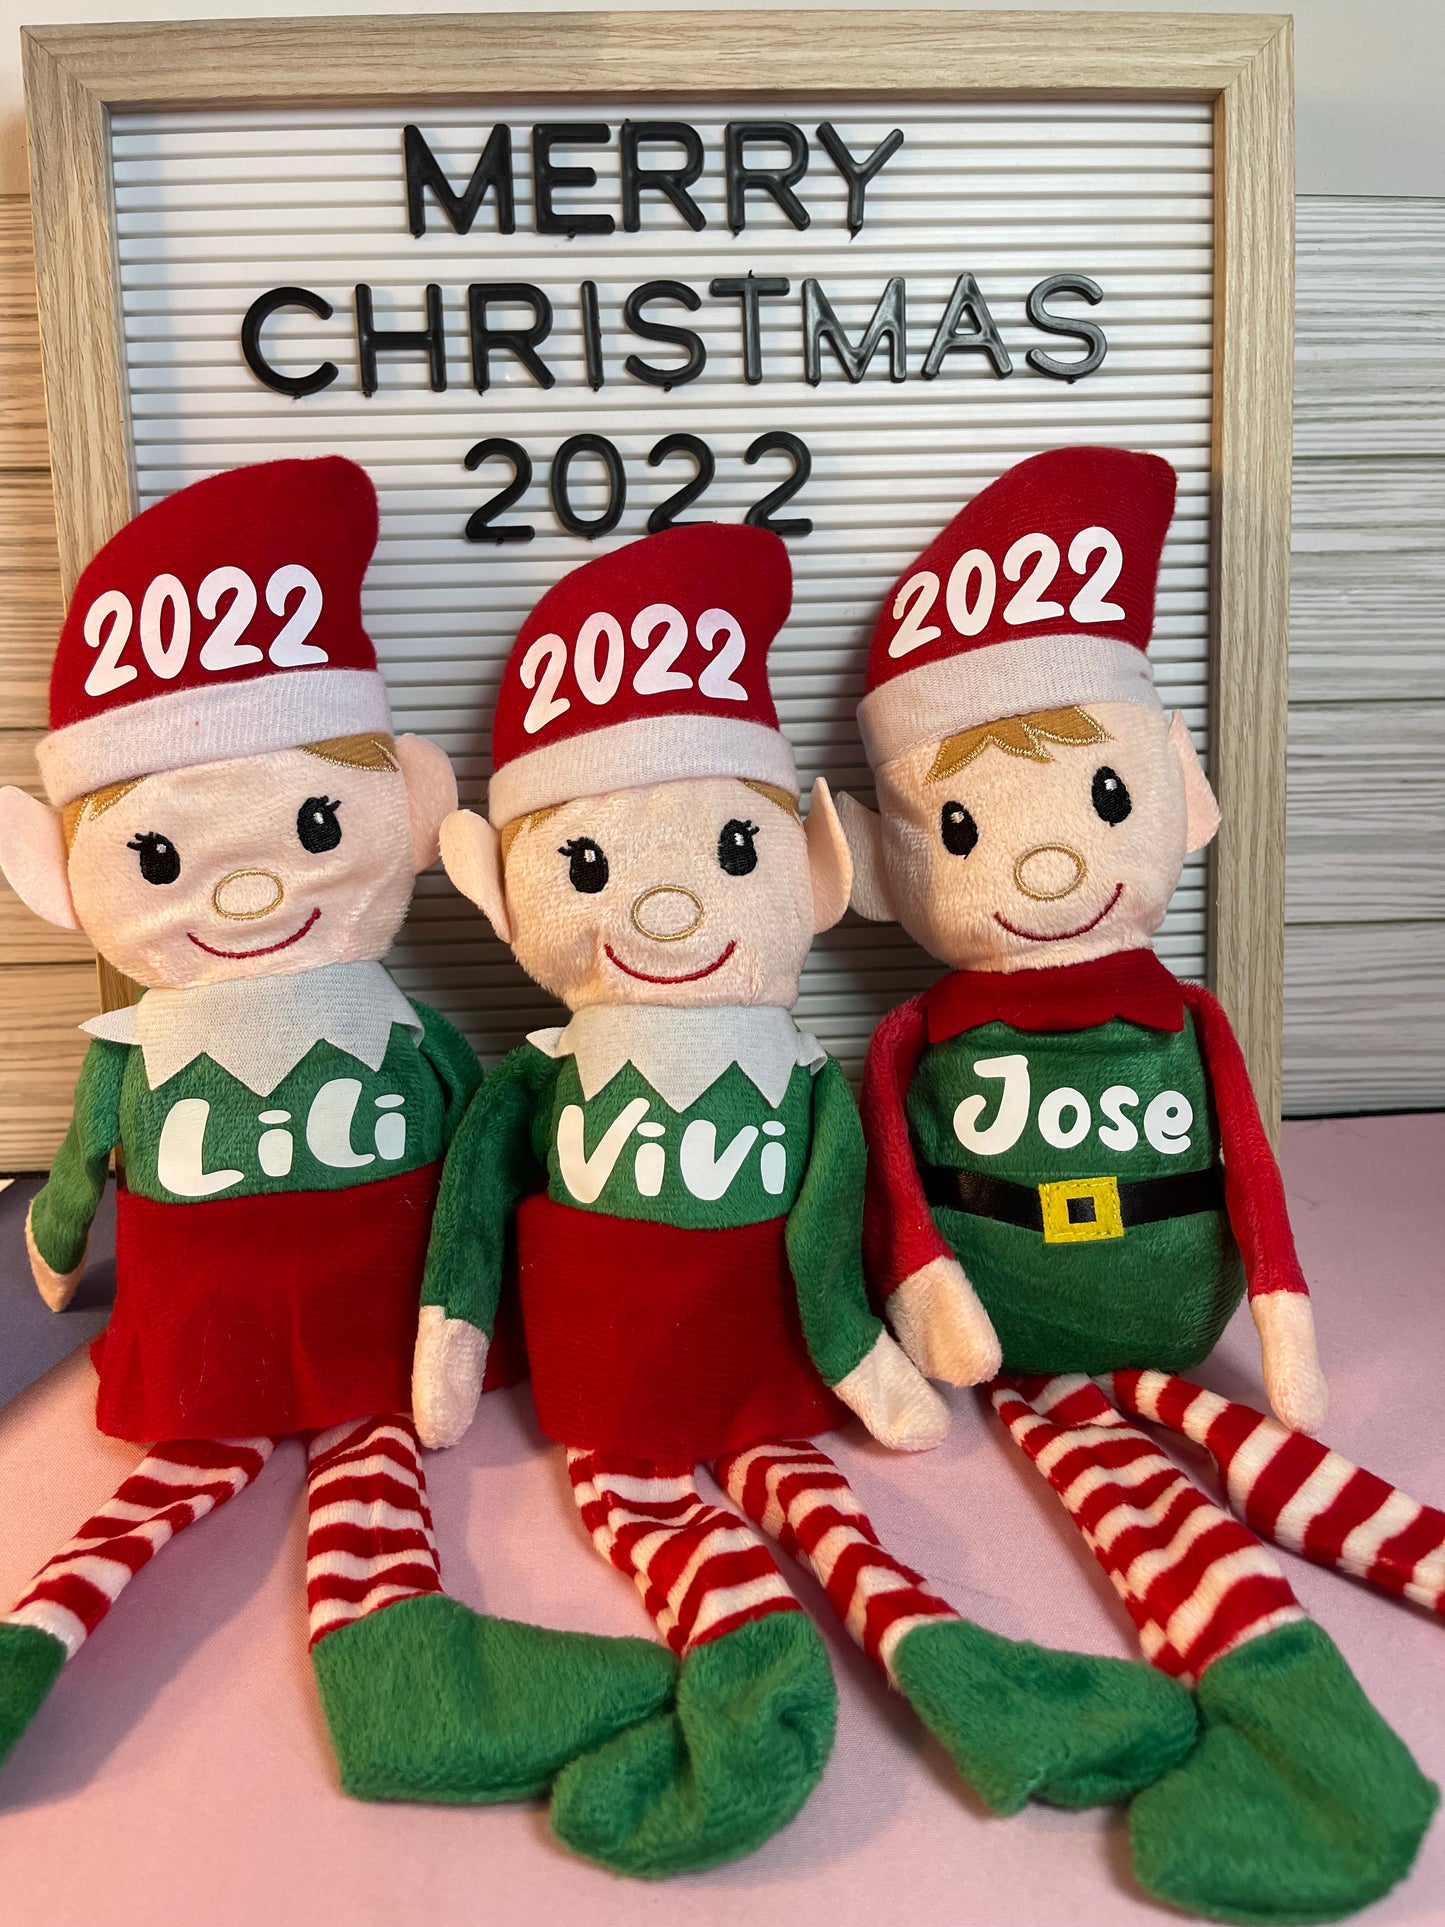 Personalized Stuffed Elf for Kids